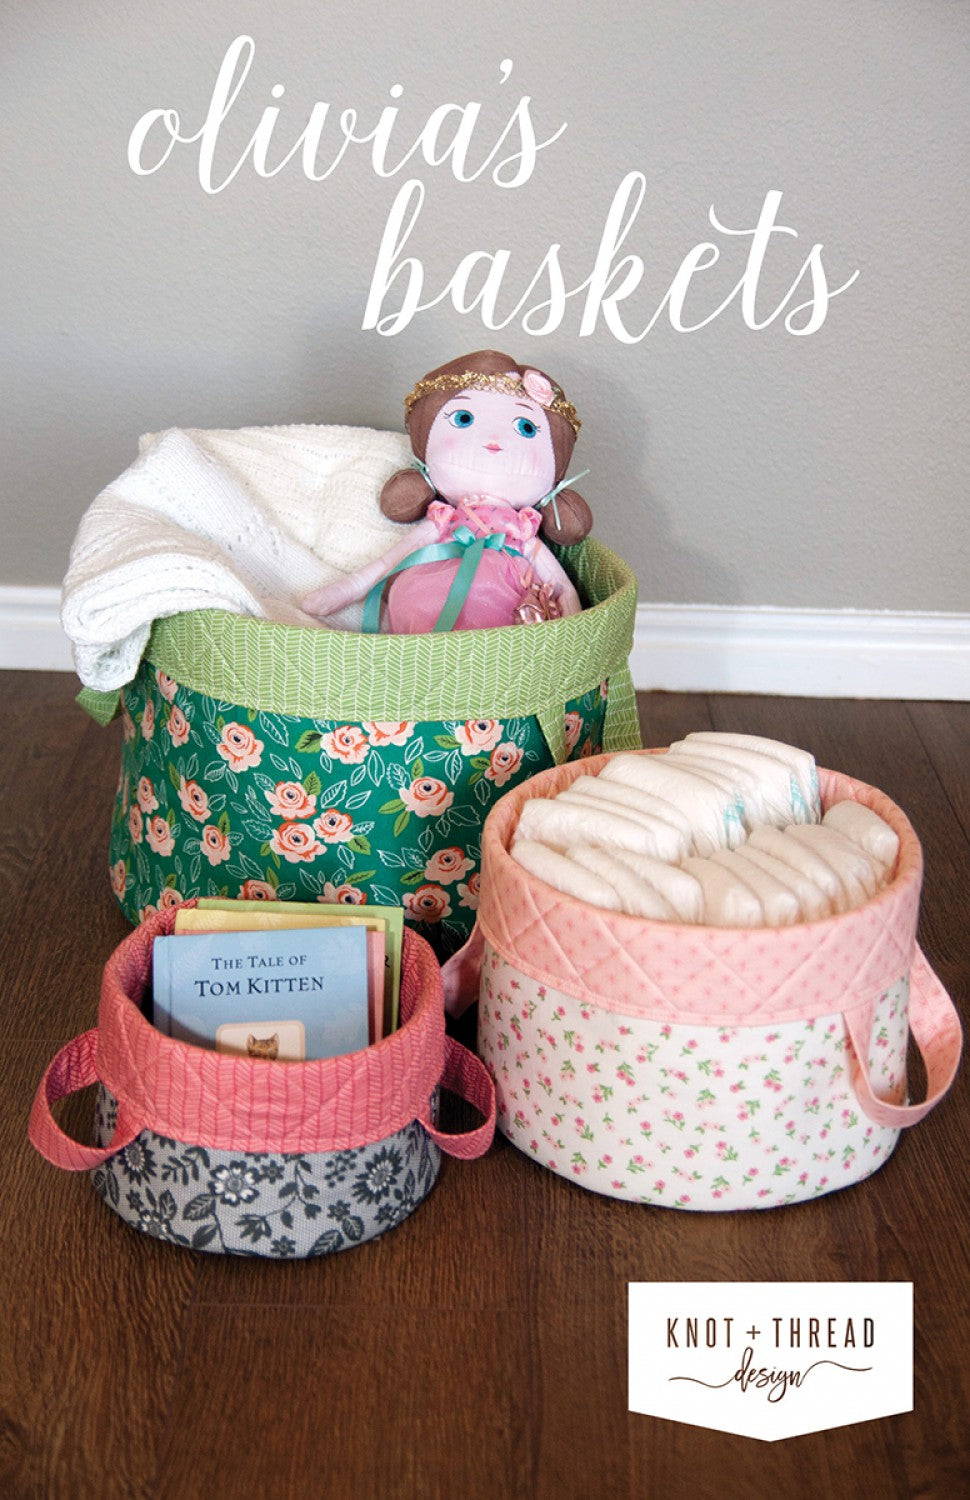 Olivia's Baskets by Knot & Thread Design - PAPER Pattern